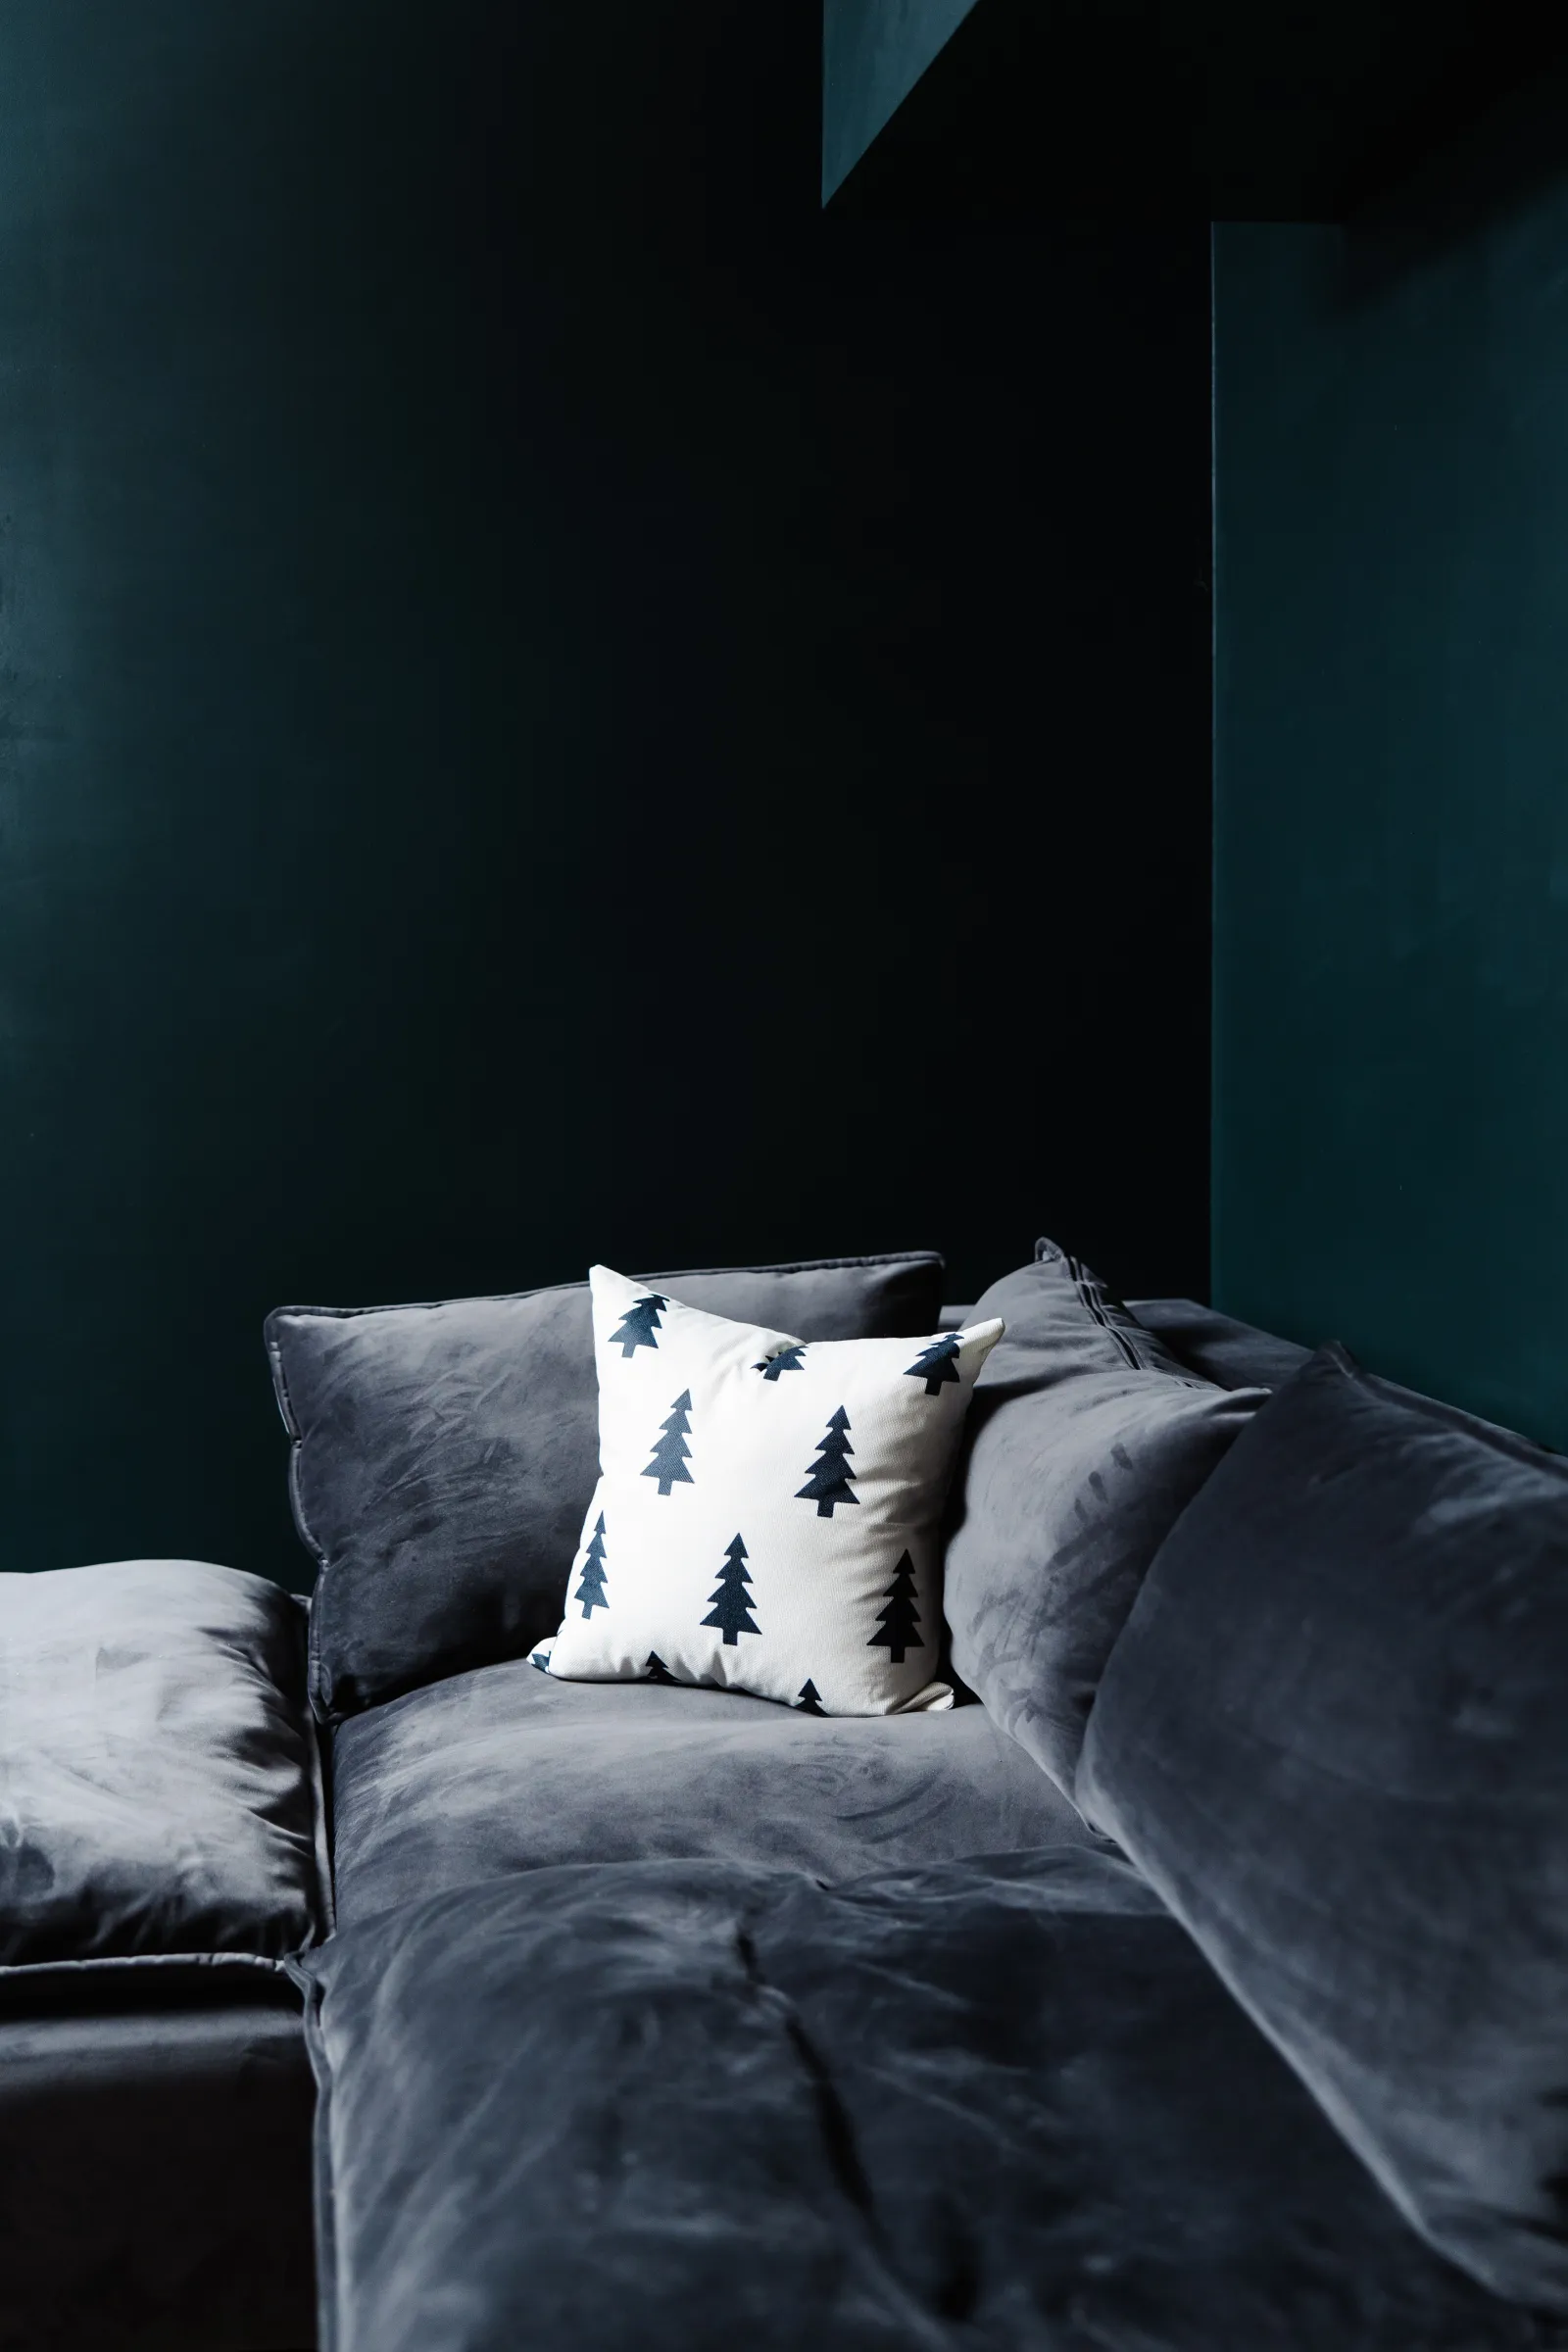 Picture of a dark gray suede couch in a dark black-painted room with a Christmas tree black and white pillow on it